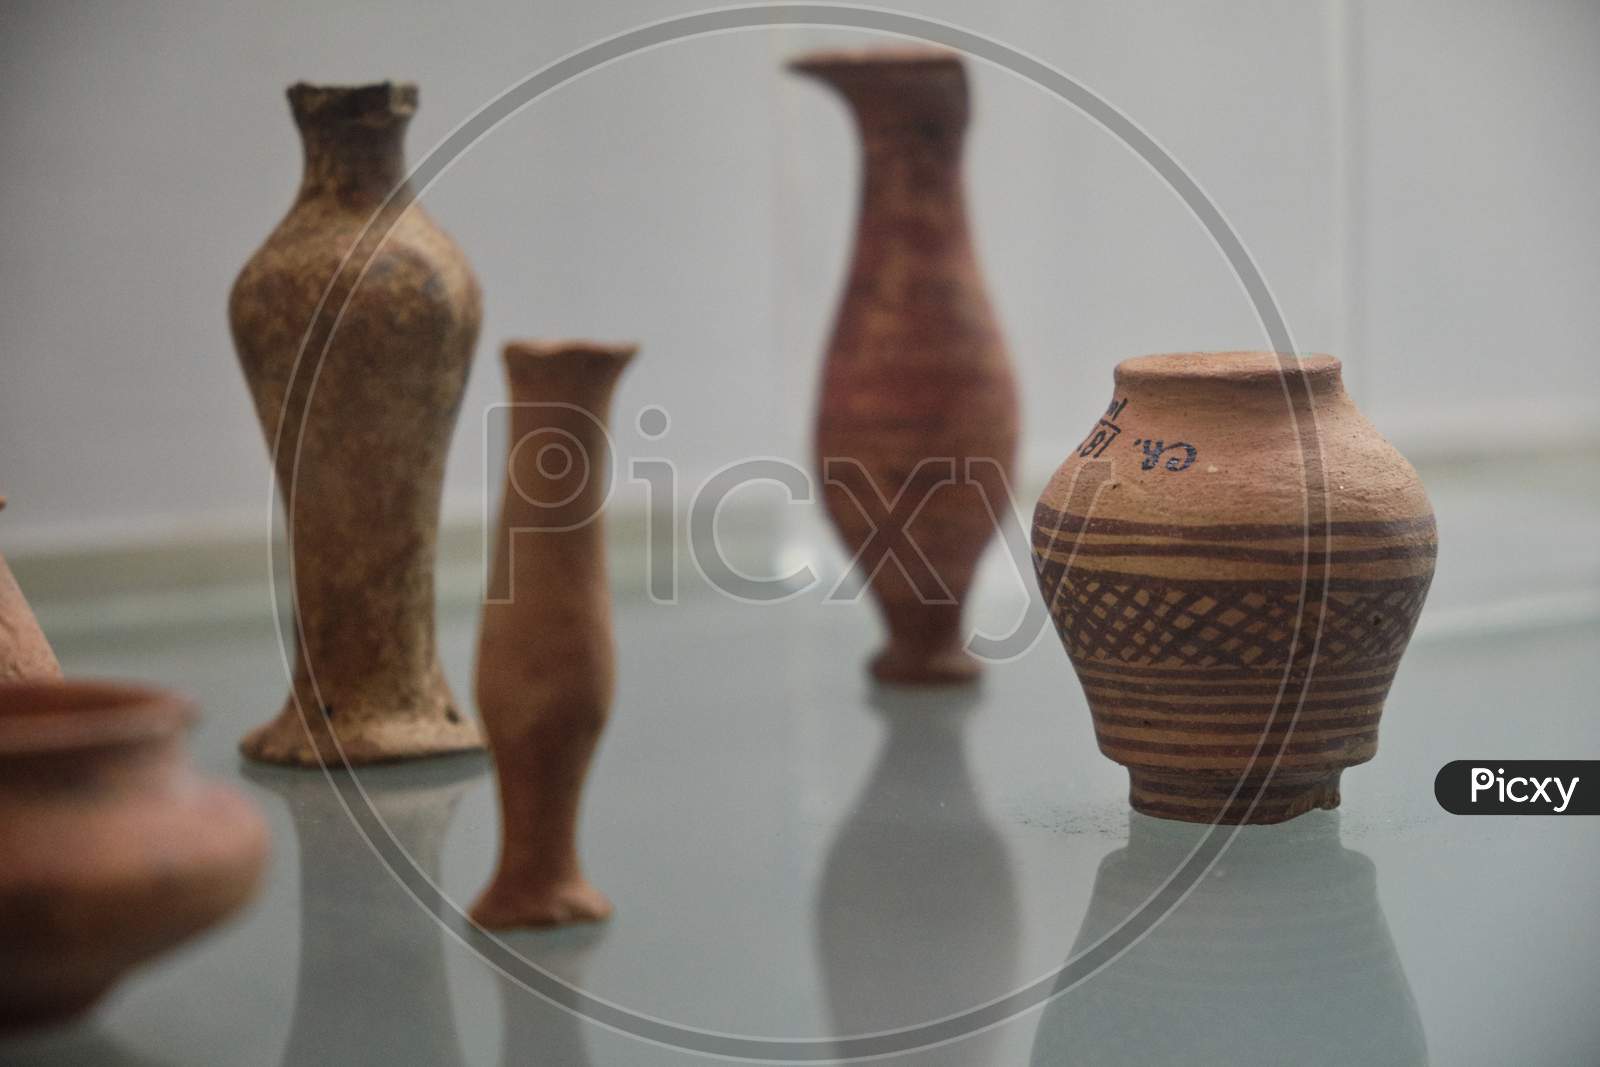 Ancient Pottery Of The Indus Valley Civilization In The National Museum Of India In New Delhi